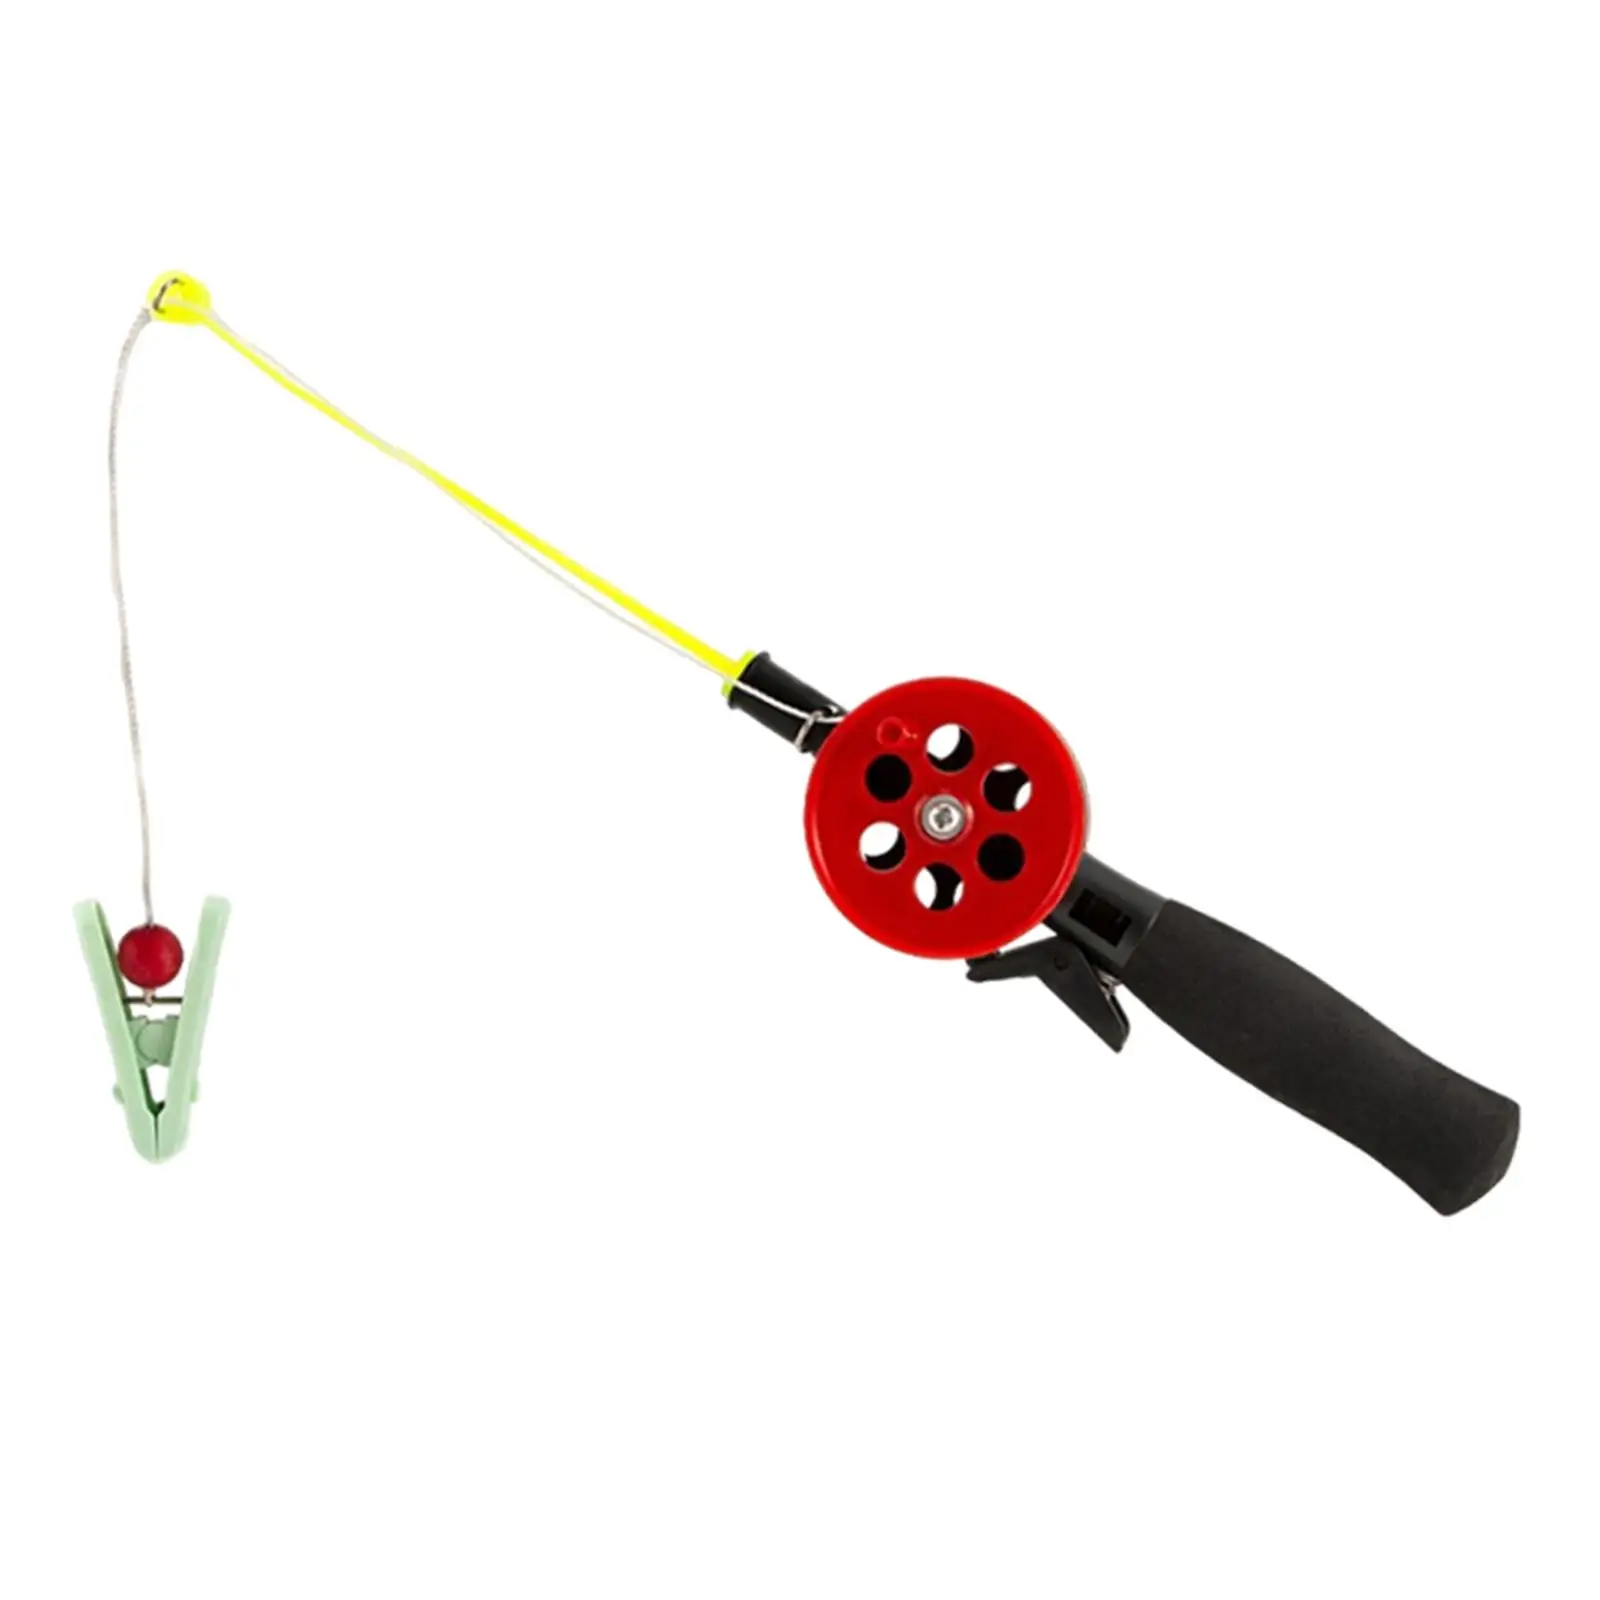 Short Ice Fishing Rod Winter Study Miniature Section Kid Fishing Rod Toy for Shrimp Catching Sea Fishing Holiday Outdoor Camping